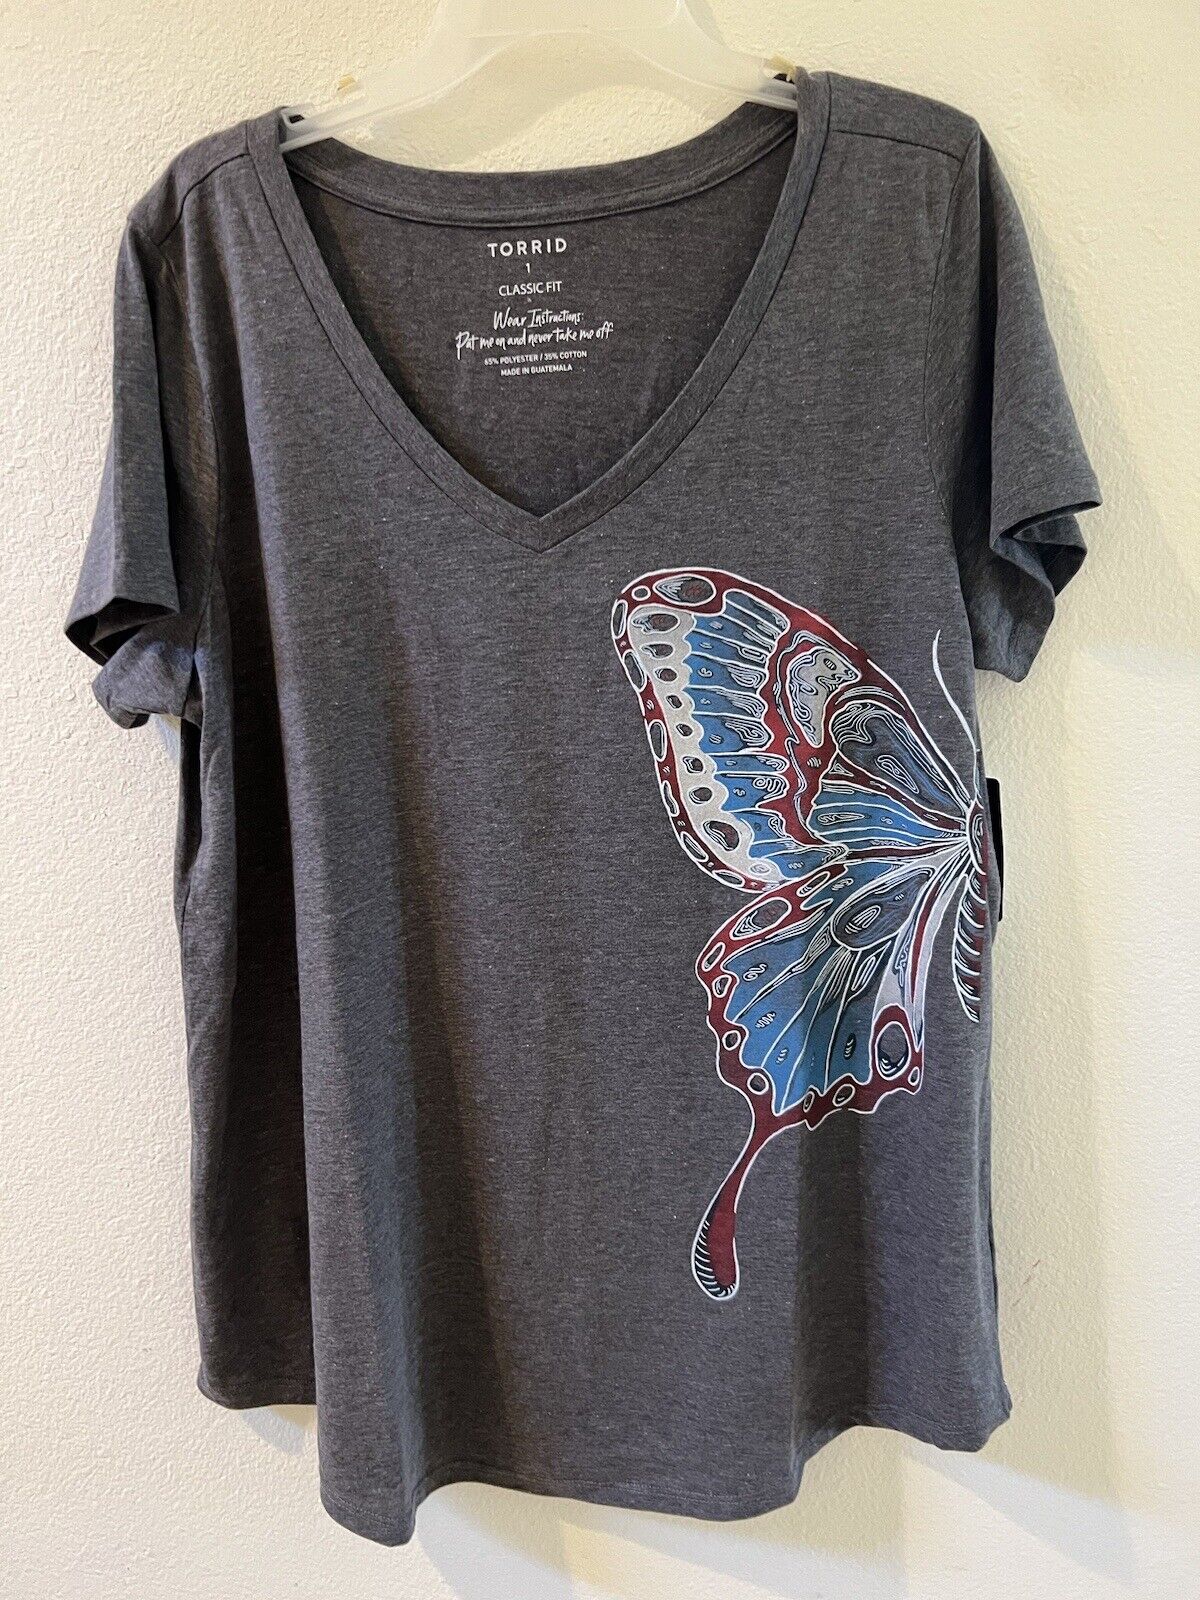 Torrid Women's Plus Classic Fit V-neck Gray Butterfly  Tee various sizes